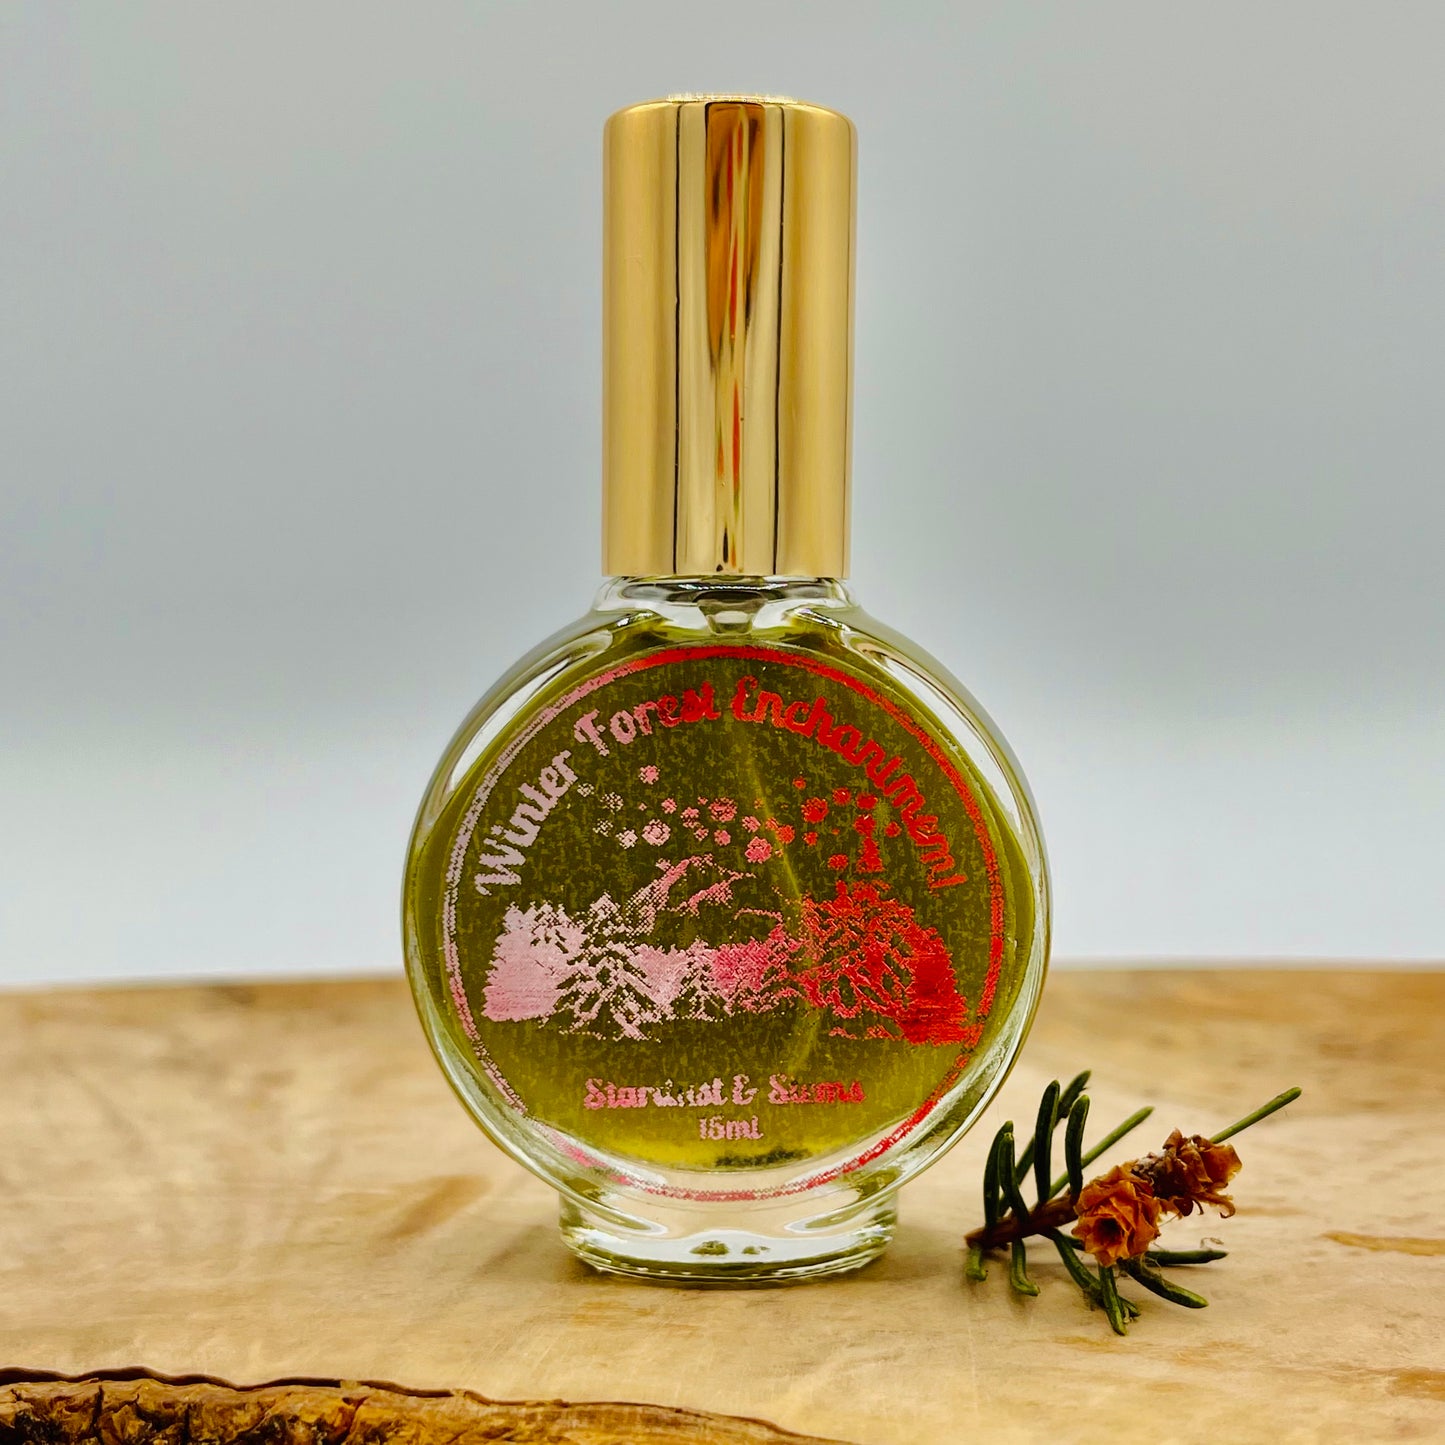 Seasonal Whimsy A Magical Set of Four Handcrafted Perfumes, One for Each Season - Spring, Summer, Fall, and Winter | Handmade, Small batch, Indie Perfume | Paraben Free | Synthetic Fragrance Free